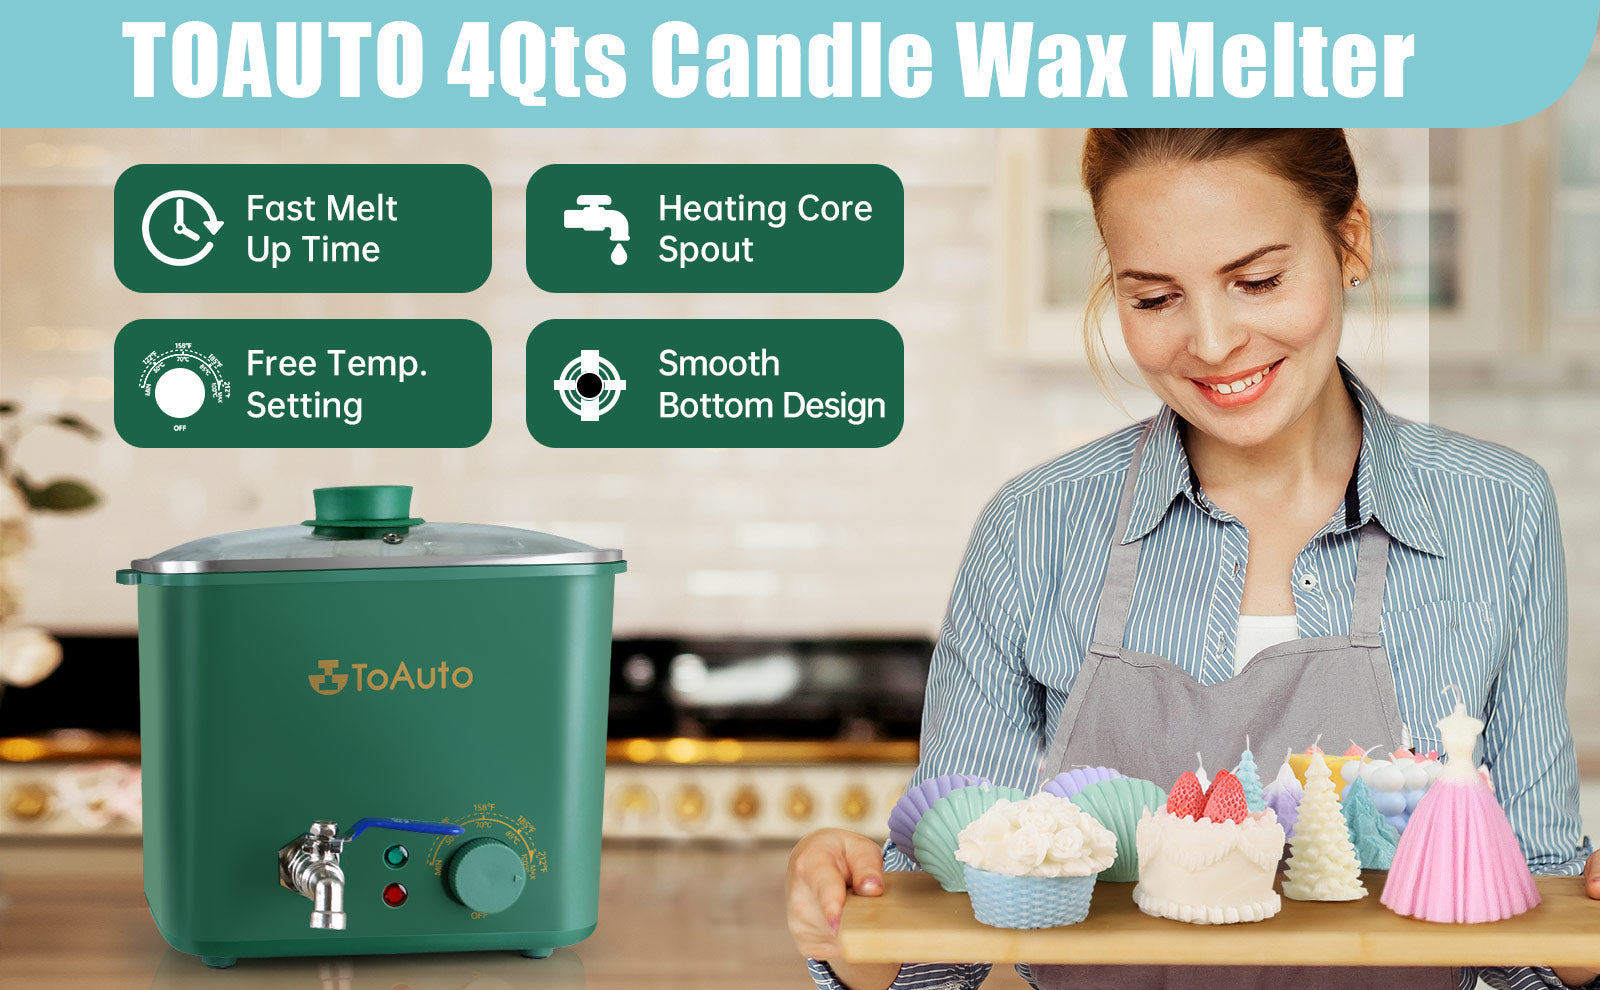 TOAUTO 4L Wax Melter Electric Melting Pot Candle Making 